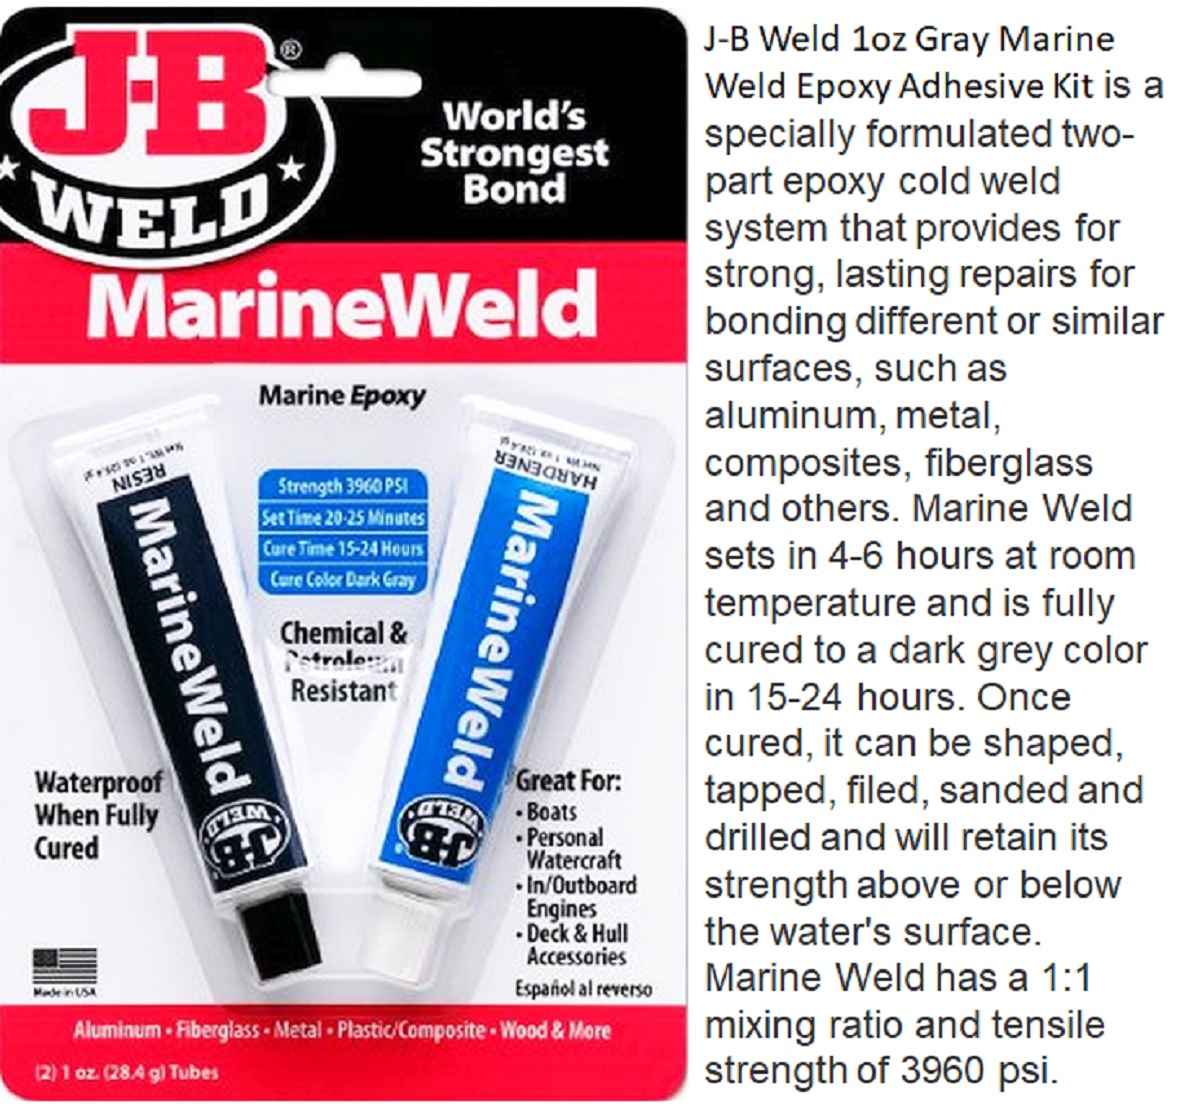 J-B Weld 1oz Gray Marine Weld Epoxy Adhesive Kit is a specially formulated two-part epoxy cold weld system that provides for strong, lasting repairs for bonding different or similar surfaces - image 5 of 7